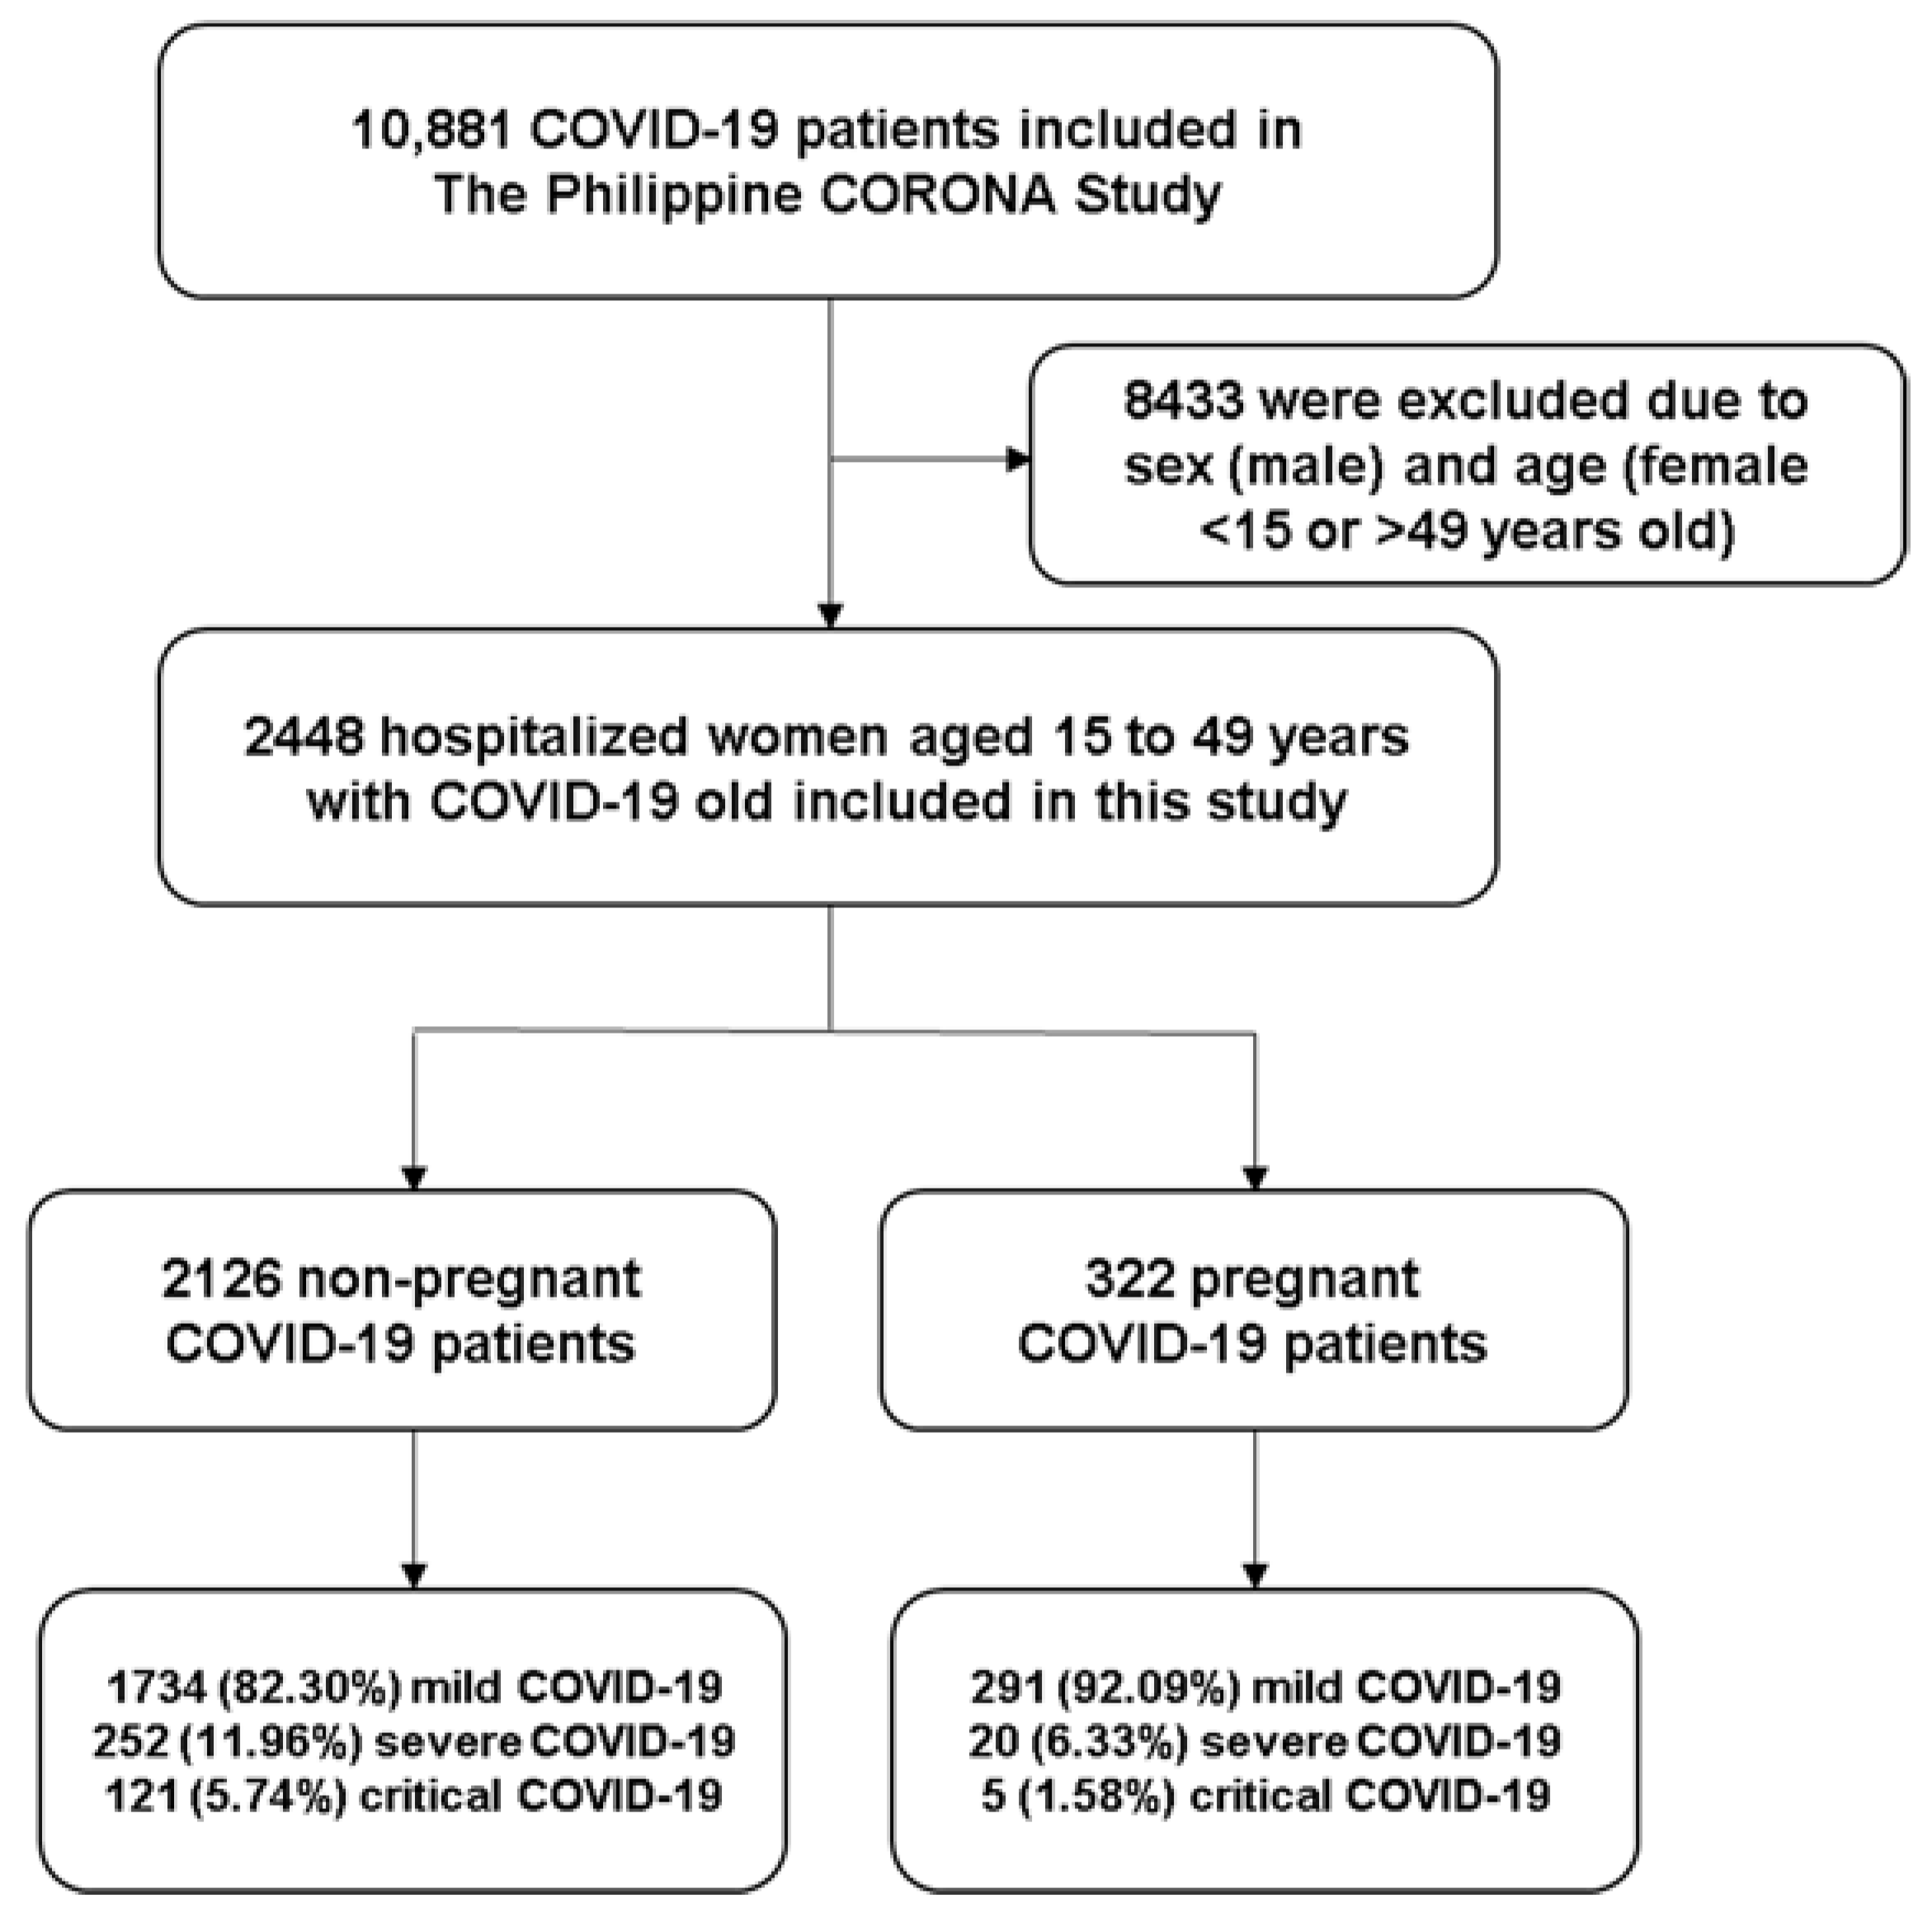 Kaplan-Meier analysis of clinical outcomes in critical COVID-19